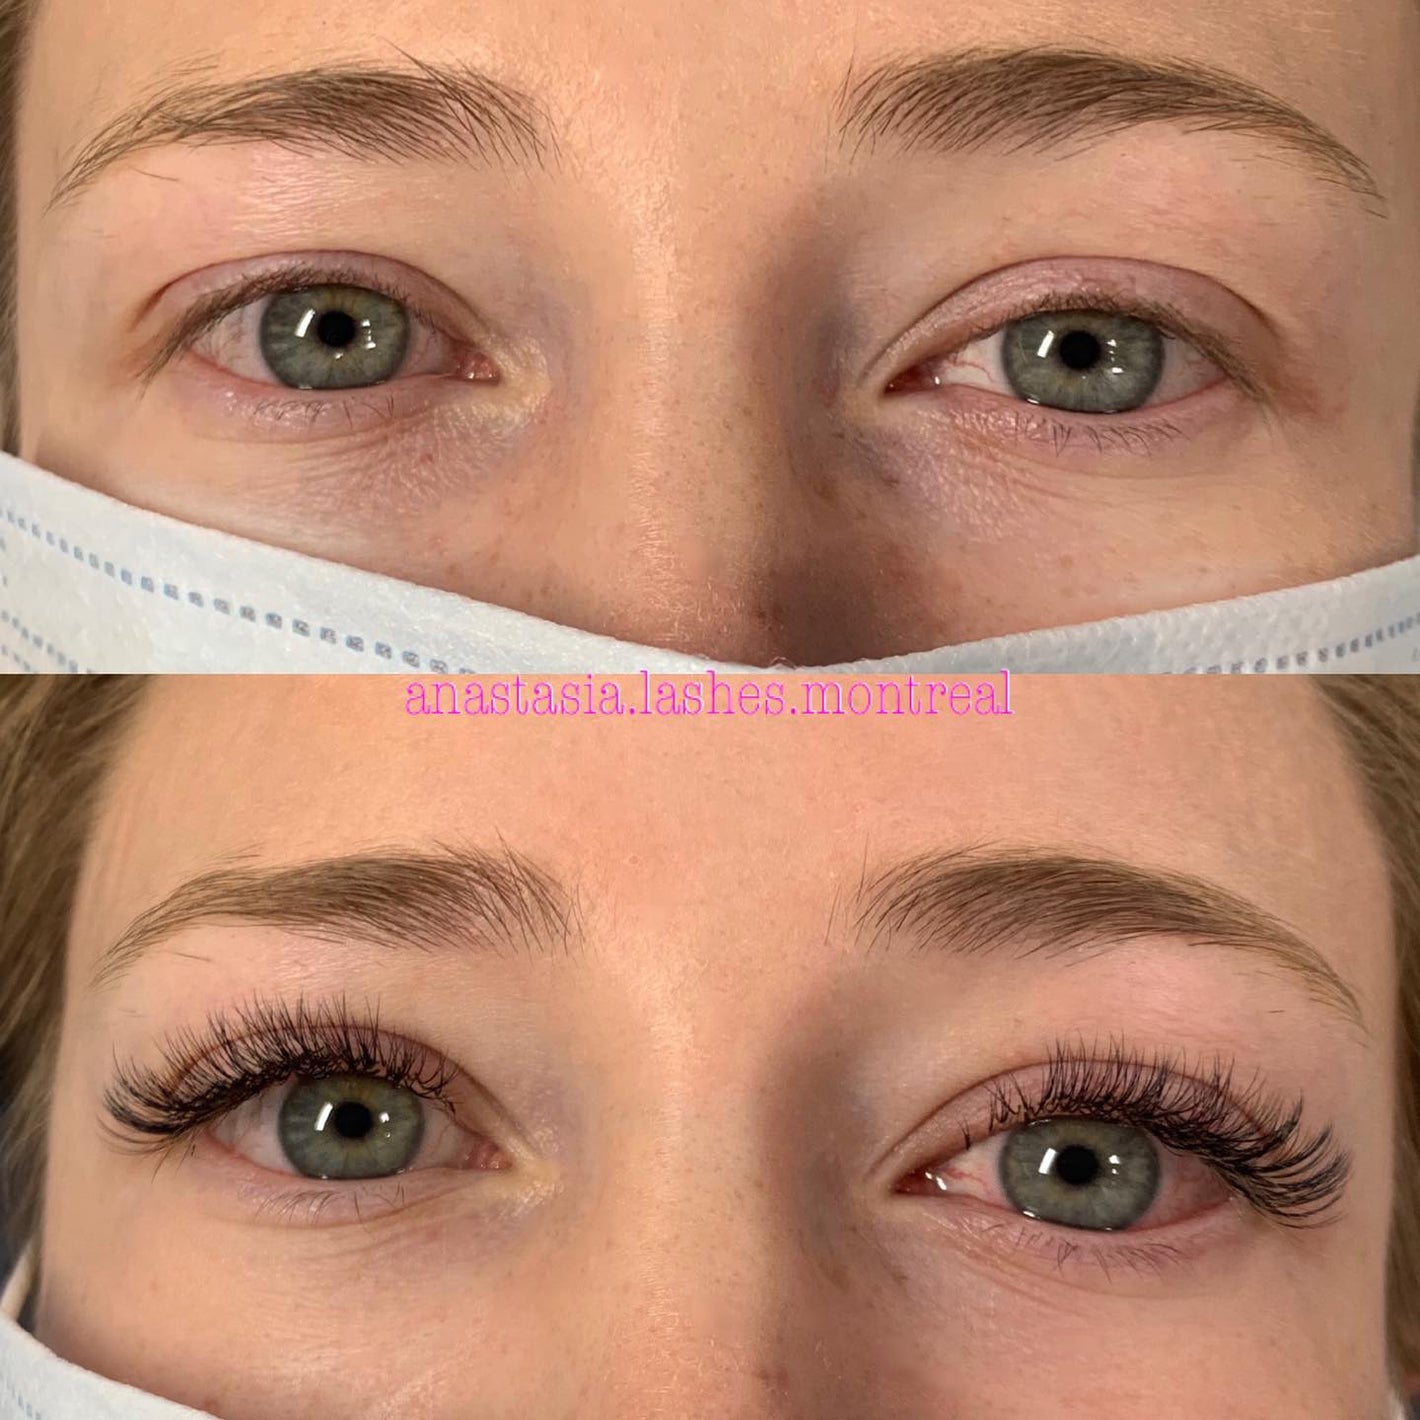 Before & after eyelash extensions by dermature